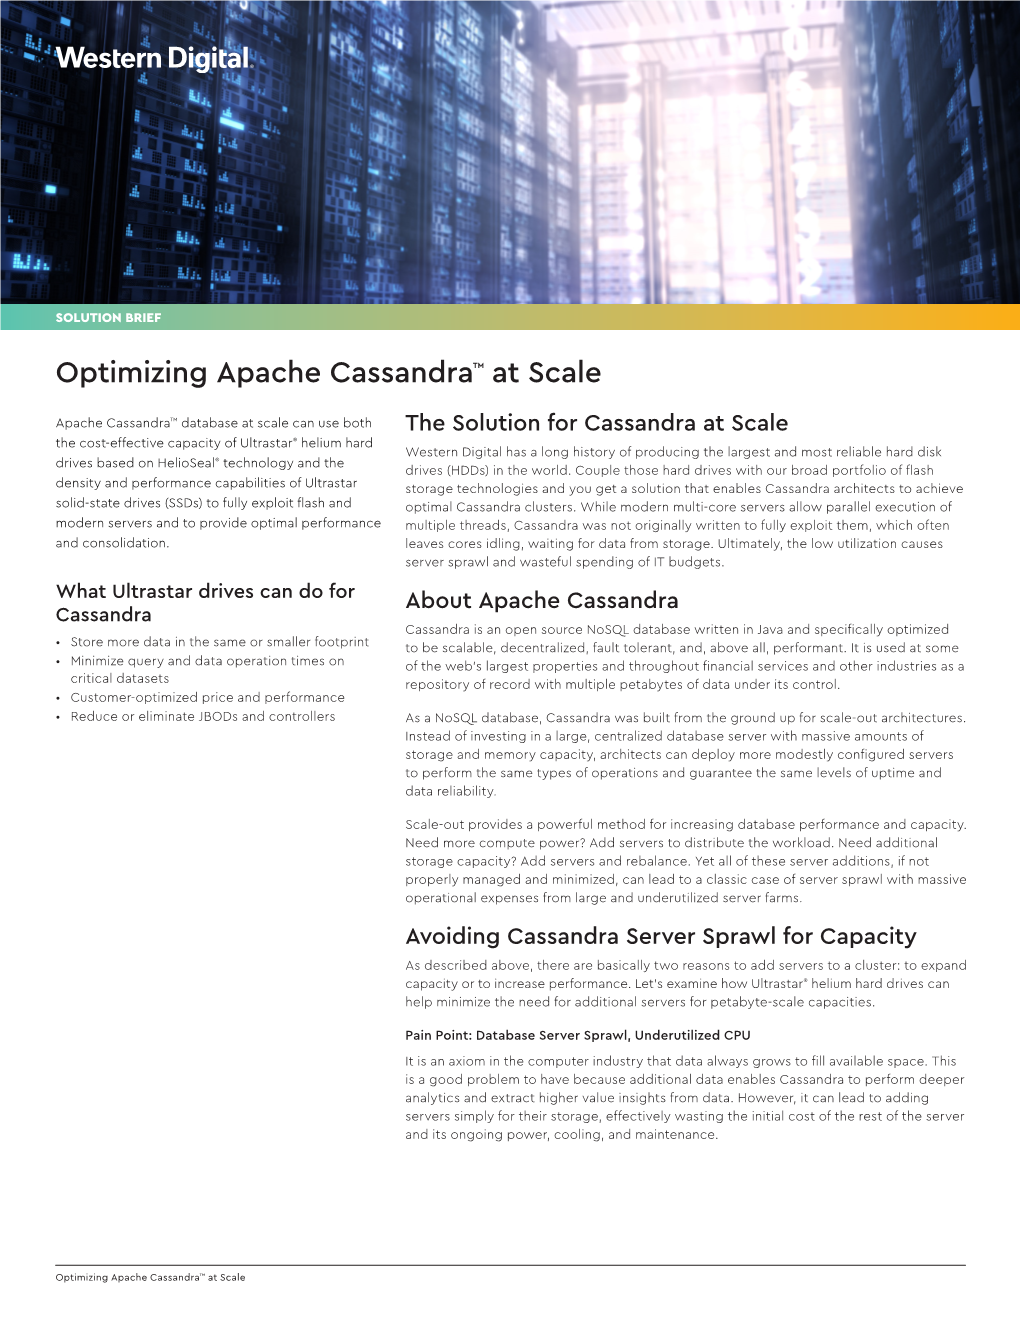 Solution Brief: Optimizing Apache Cassandra Database at Scale